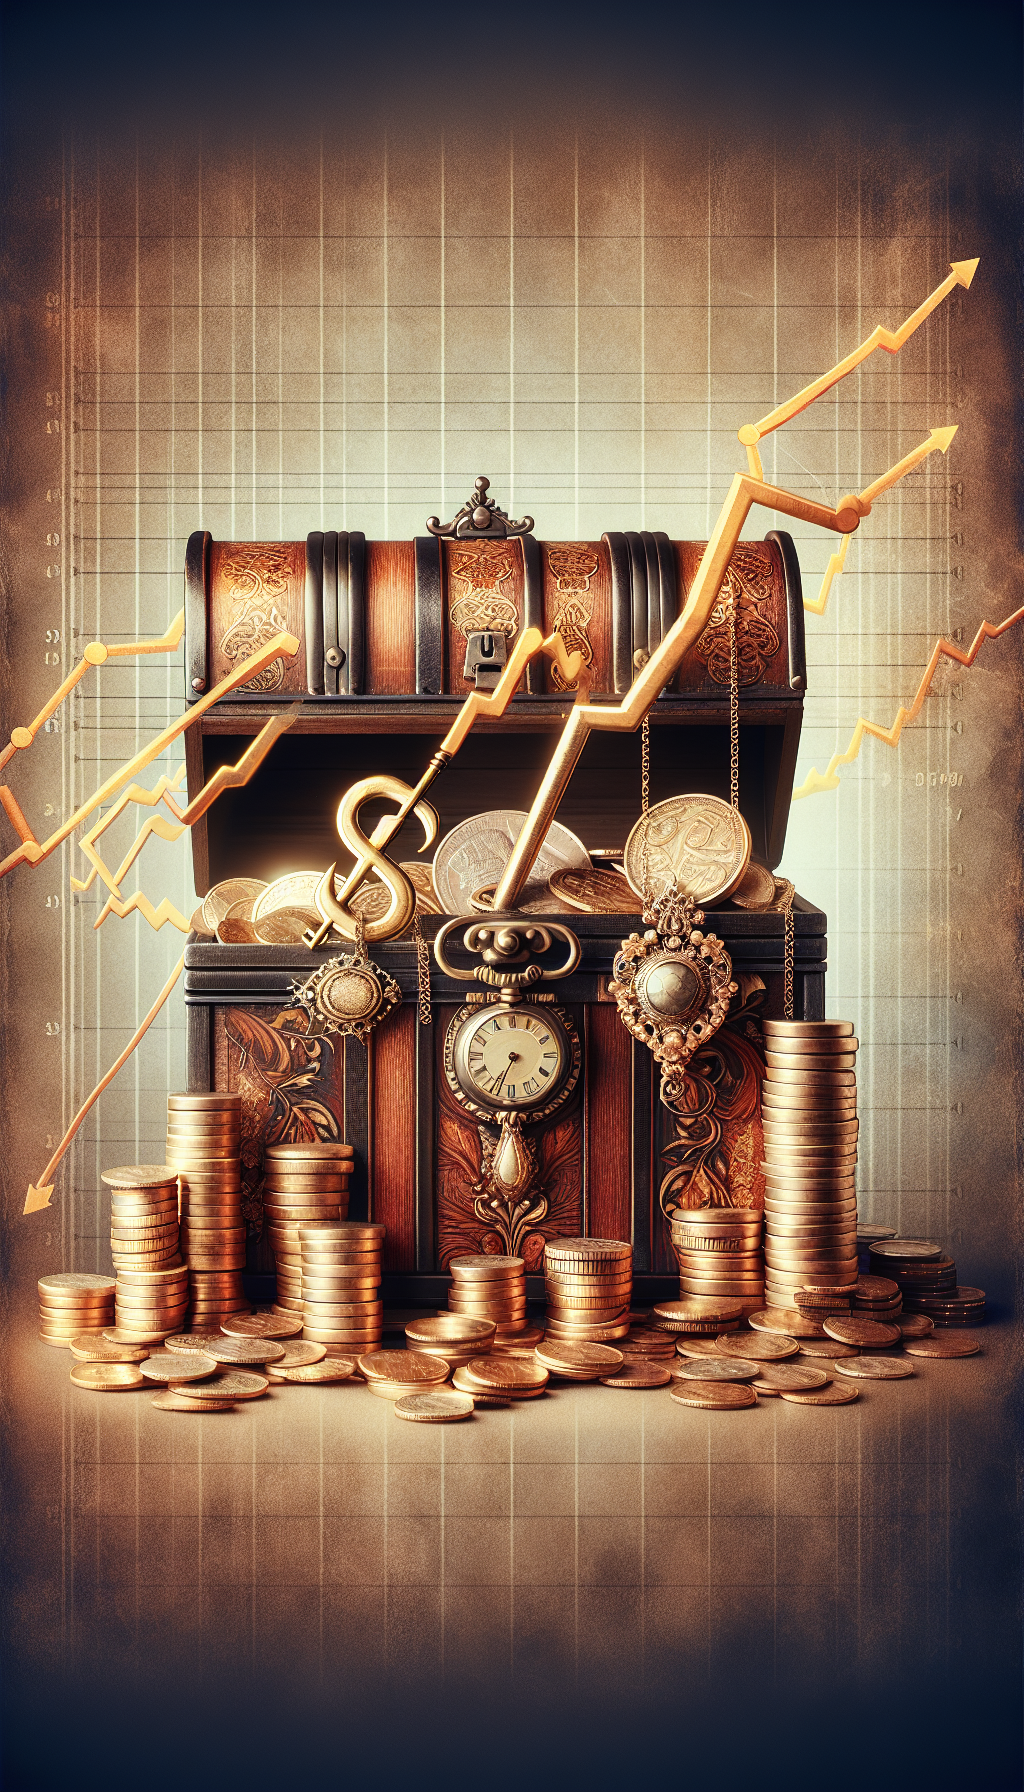 A vintage wooden treasure chest overflows with coins, antique jewelry, and classic timepieces, atop a soaring stock graph. The key hanging from the chest's lock morphs into an elegant dollar sign, symbolizing the merging of historical charm with financial gain. Gold and sepia tones highlight the antiquity and value, with a fine patina texture subtly applied for an aged look.